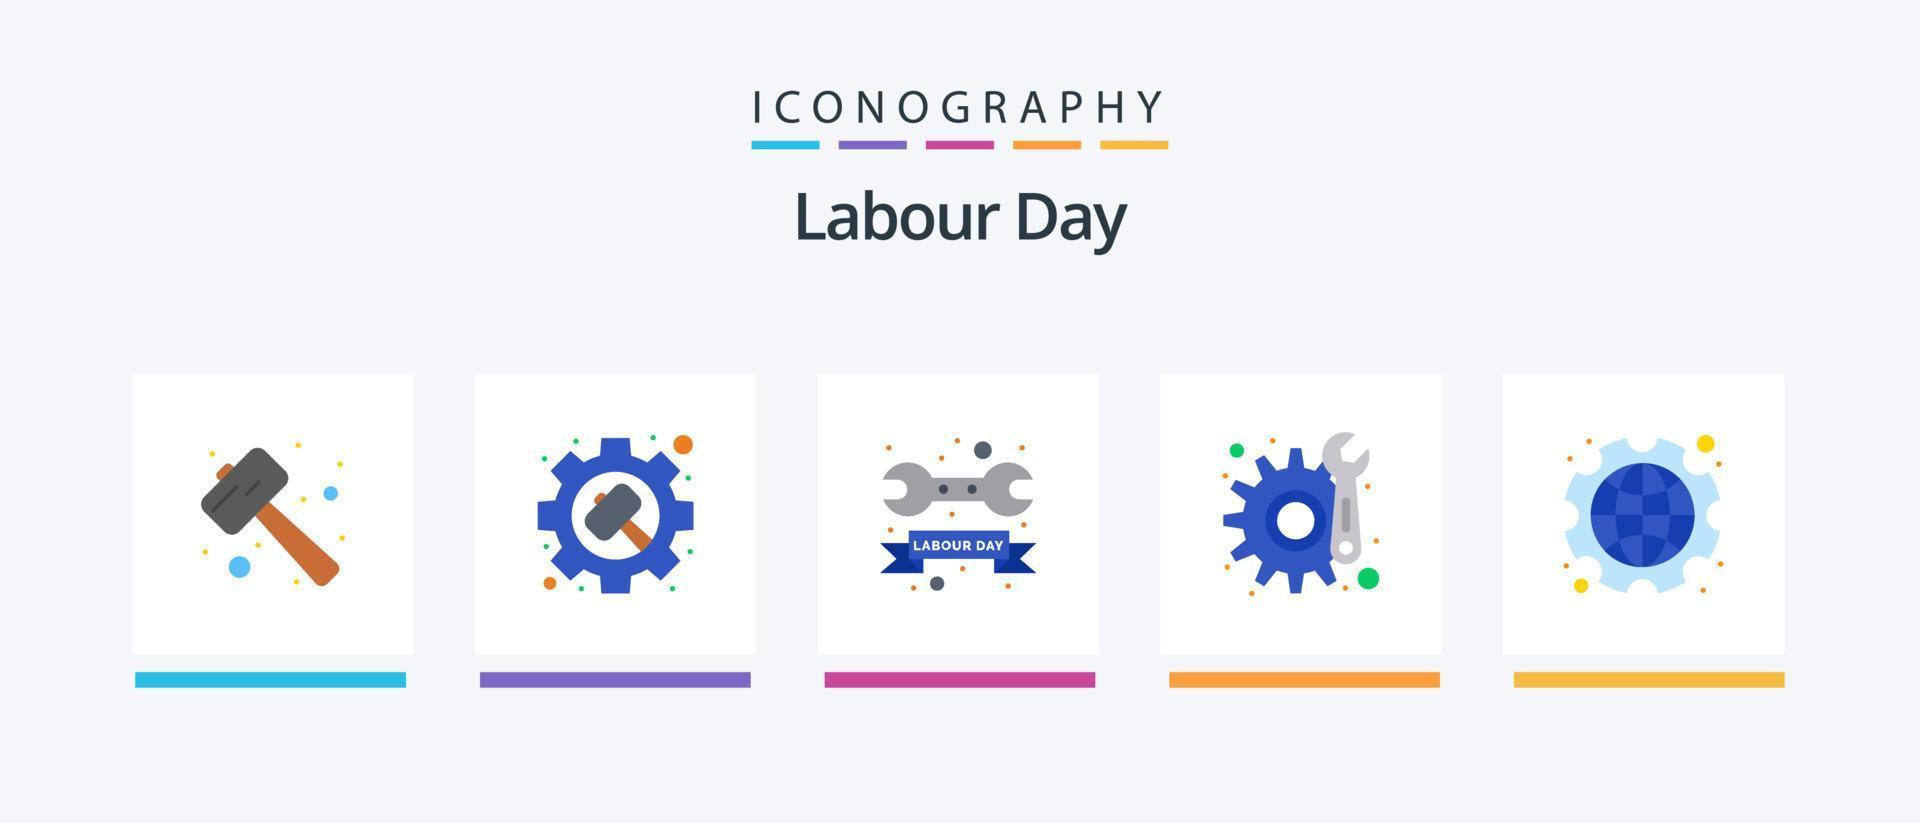 Labour Day Flat 5 Icon Pack Including international. maintenance. settings. gear. wrench. Creative Icons Design vector